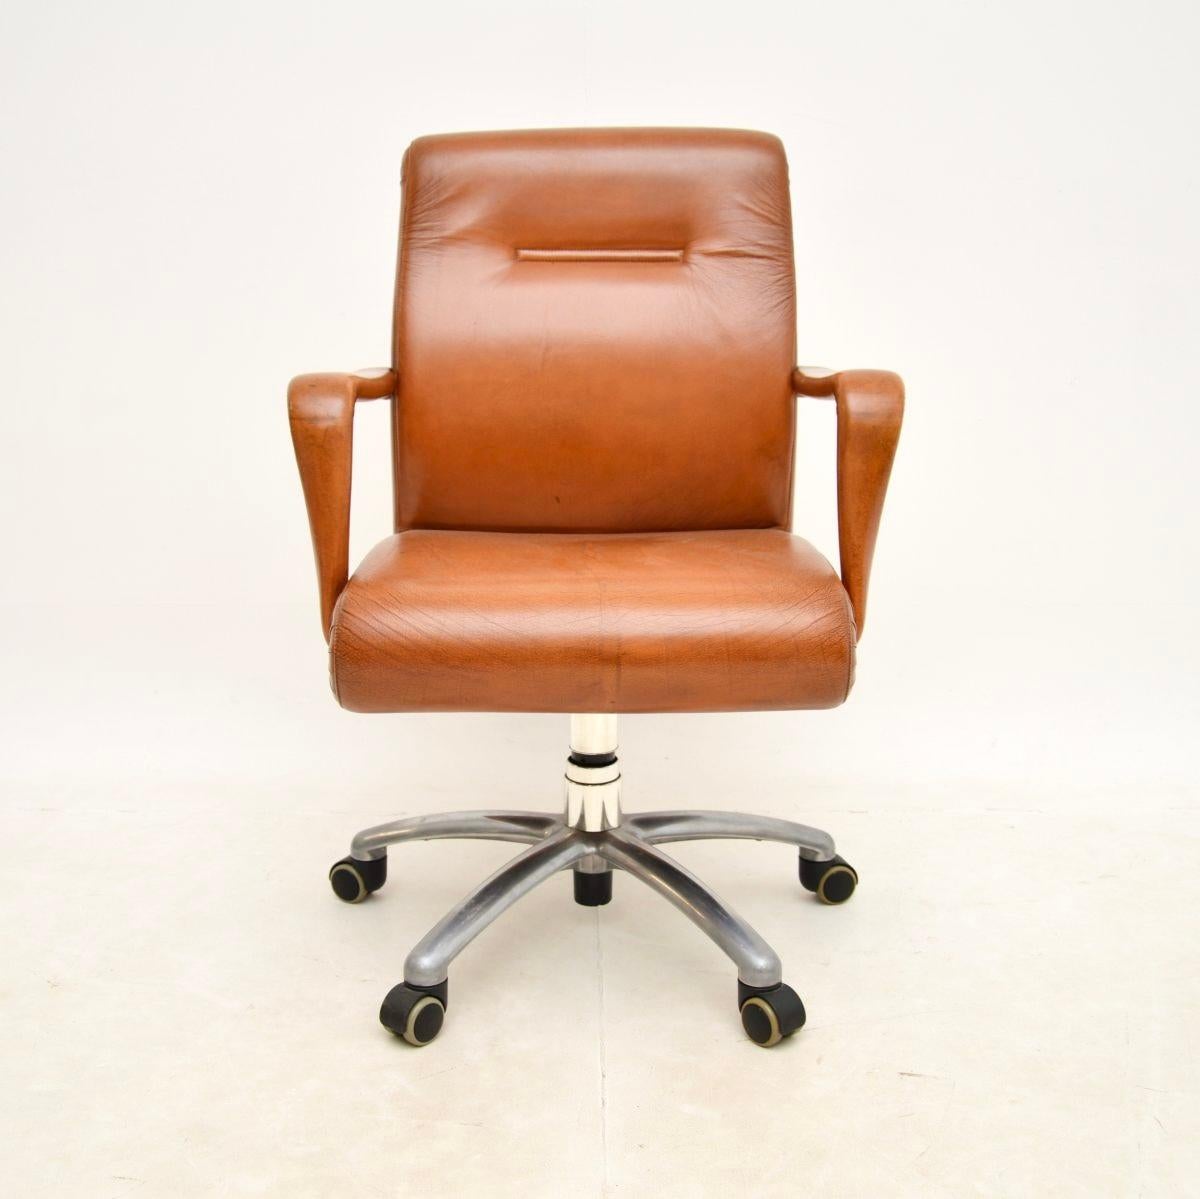 A very stylish, well made and extremely comfortable vintage Italian leather swivel desk chair by Poltrona Frau. It was made in Italy, it dates from the late 20th century.

The quality is outstanding, it is upholstered in a gorgeous brown leather